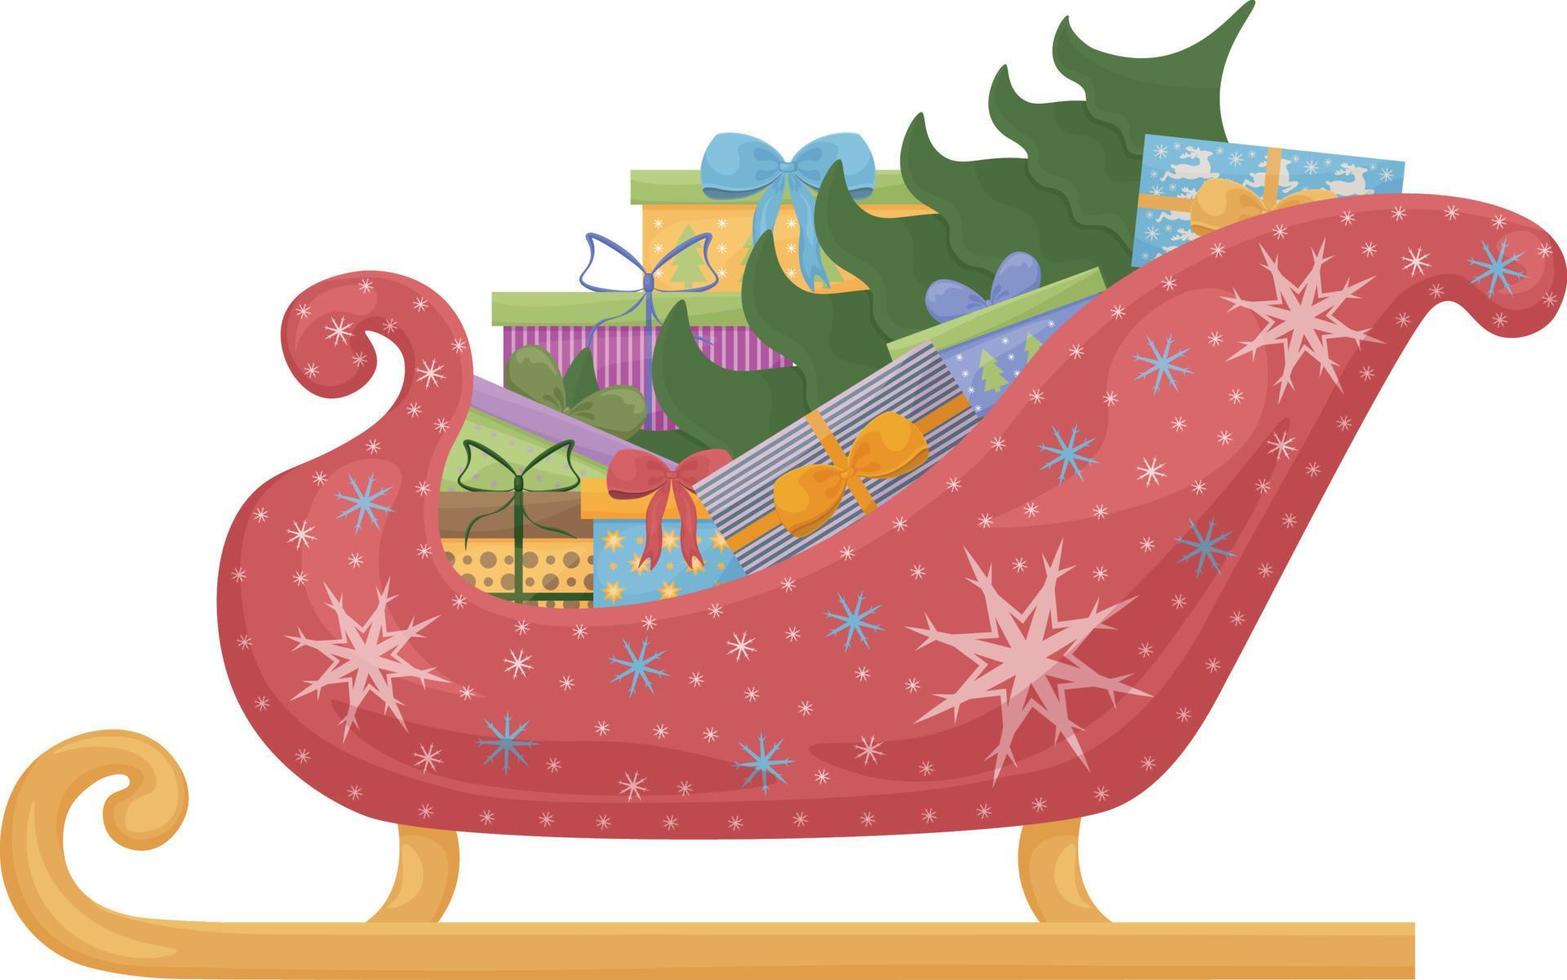 Santa Claus sleigh with gift boxes and a Christmas tree. Santa s bright red sleigh decorated with white and blue snowflakes. Santa Claus Christmas transport. Vector illustration isolated